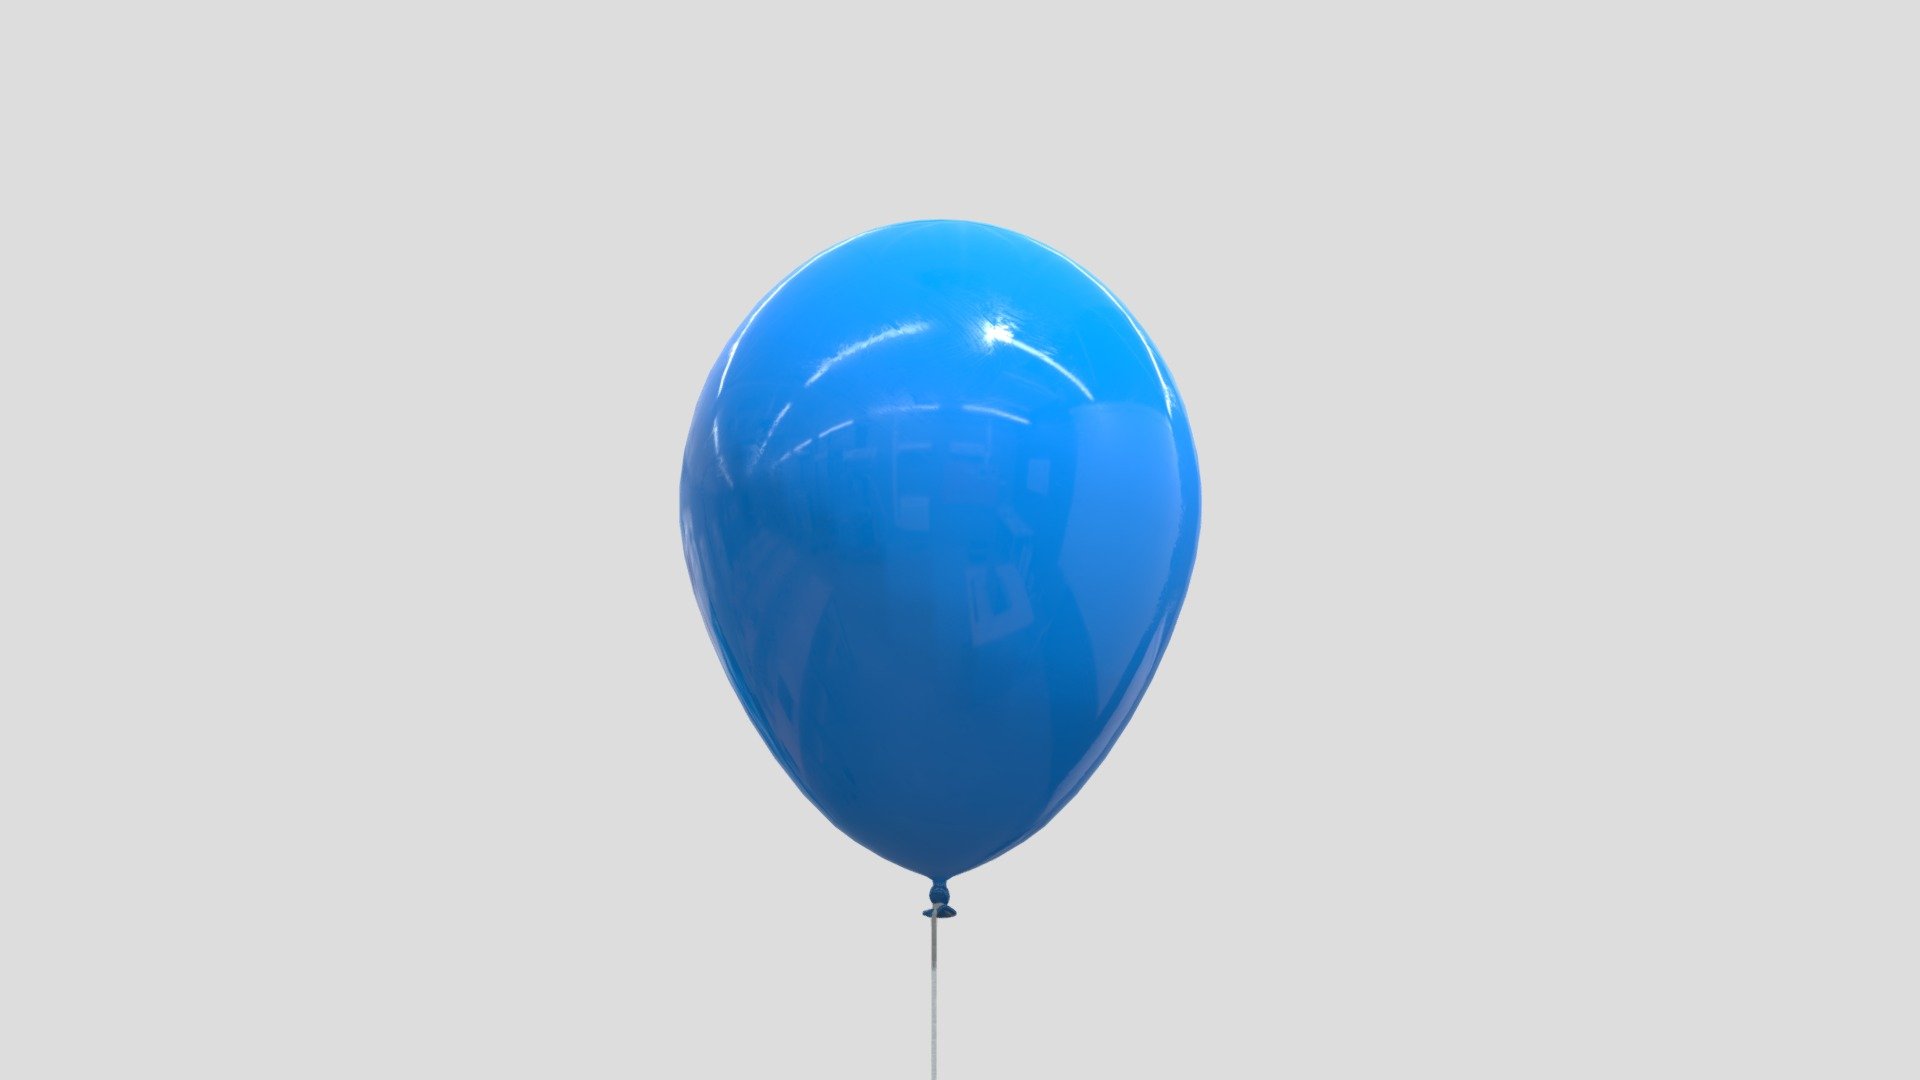 This Balloon is a perfect addition to any party, celebration or as the main focus of any artwork or animation. The model is viewable from all angles and distances. Change the color for any color using a hue saturation node.

This Inlcudes:

The mesh (Balloon, String)
4K and 2K Texture Set (Albedo, Roughness, Normal, Opacity)
2 Variants (Solid Color, Vertical Gradient)
The mesh is UV Unwrapped for easy retexturing 3d model